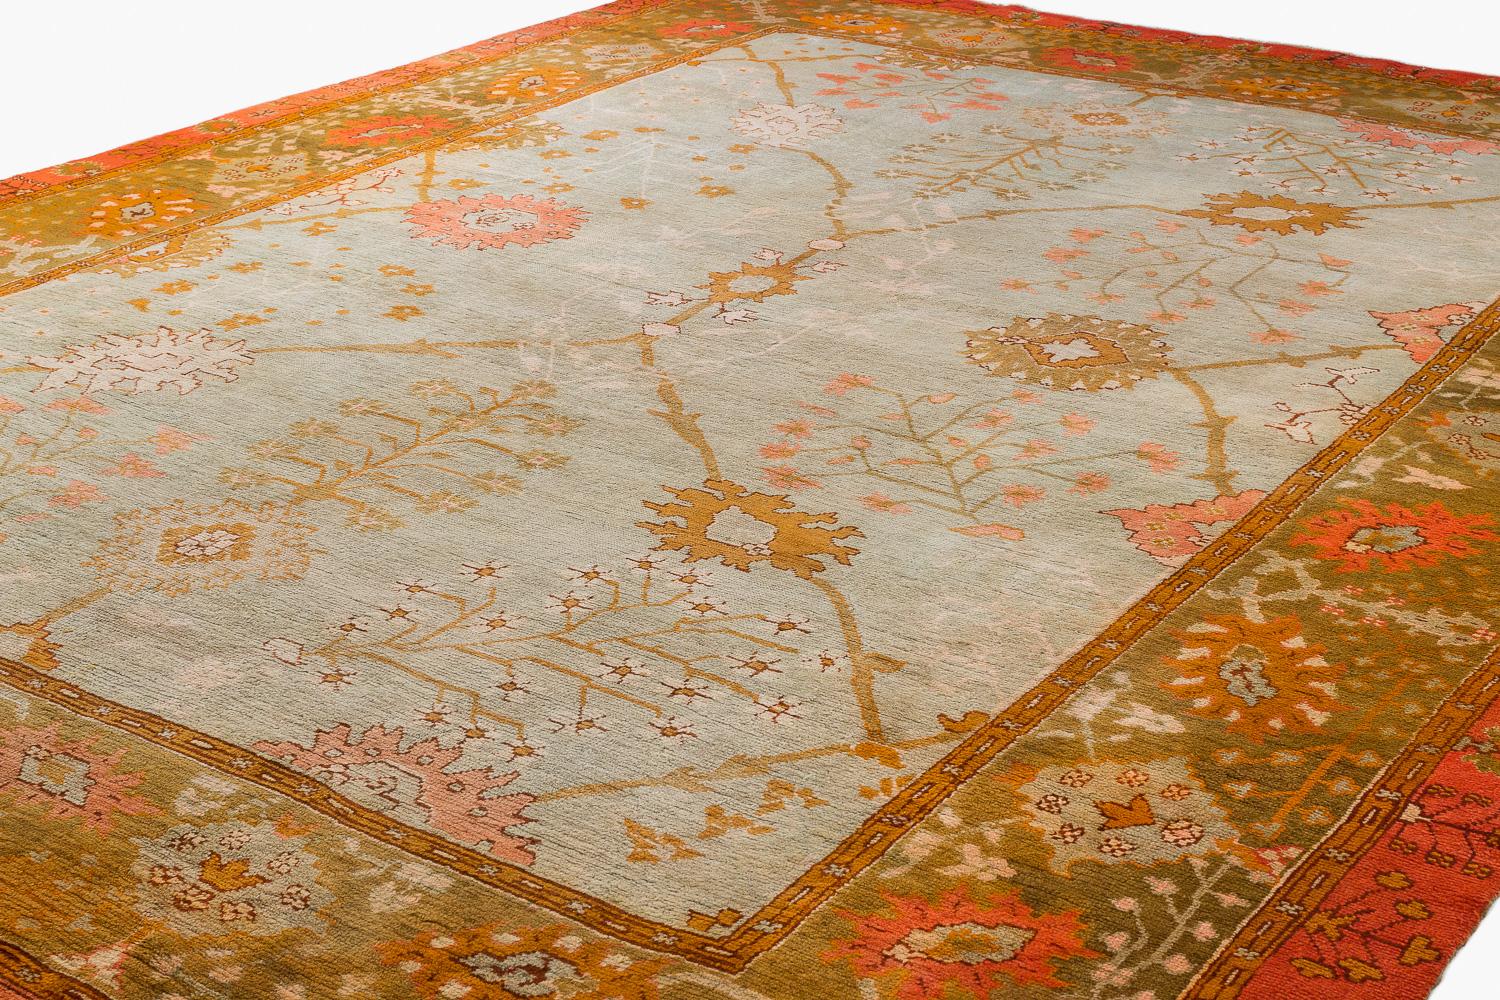 This antique Ouskak is an exceptional piece. This type of Oushak is very desirable based on the design and colors. The beautiful colors are vibrant and inviting featuring a celadon field with a large orange border and pops of green. The design has a